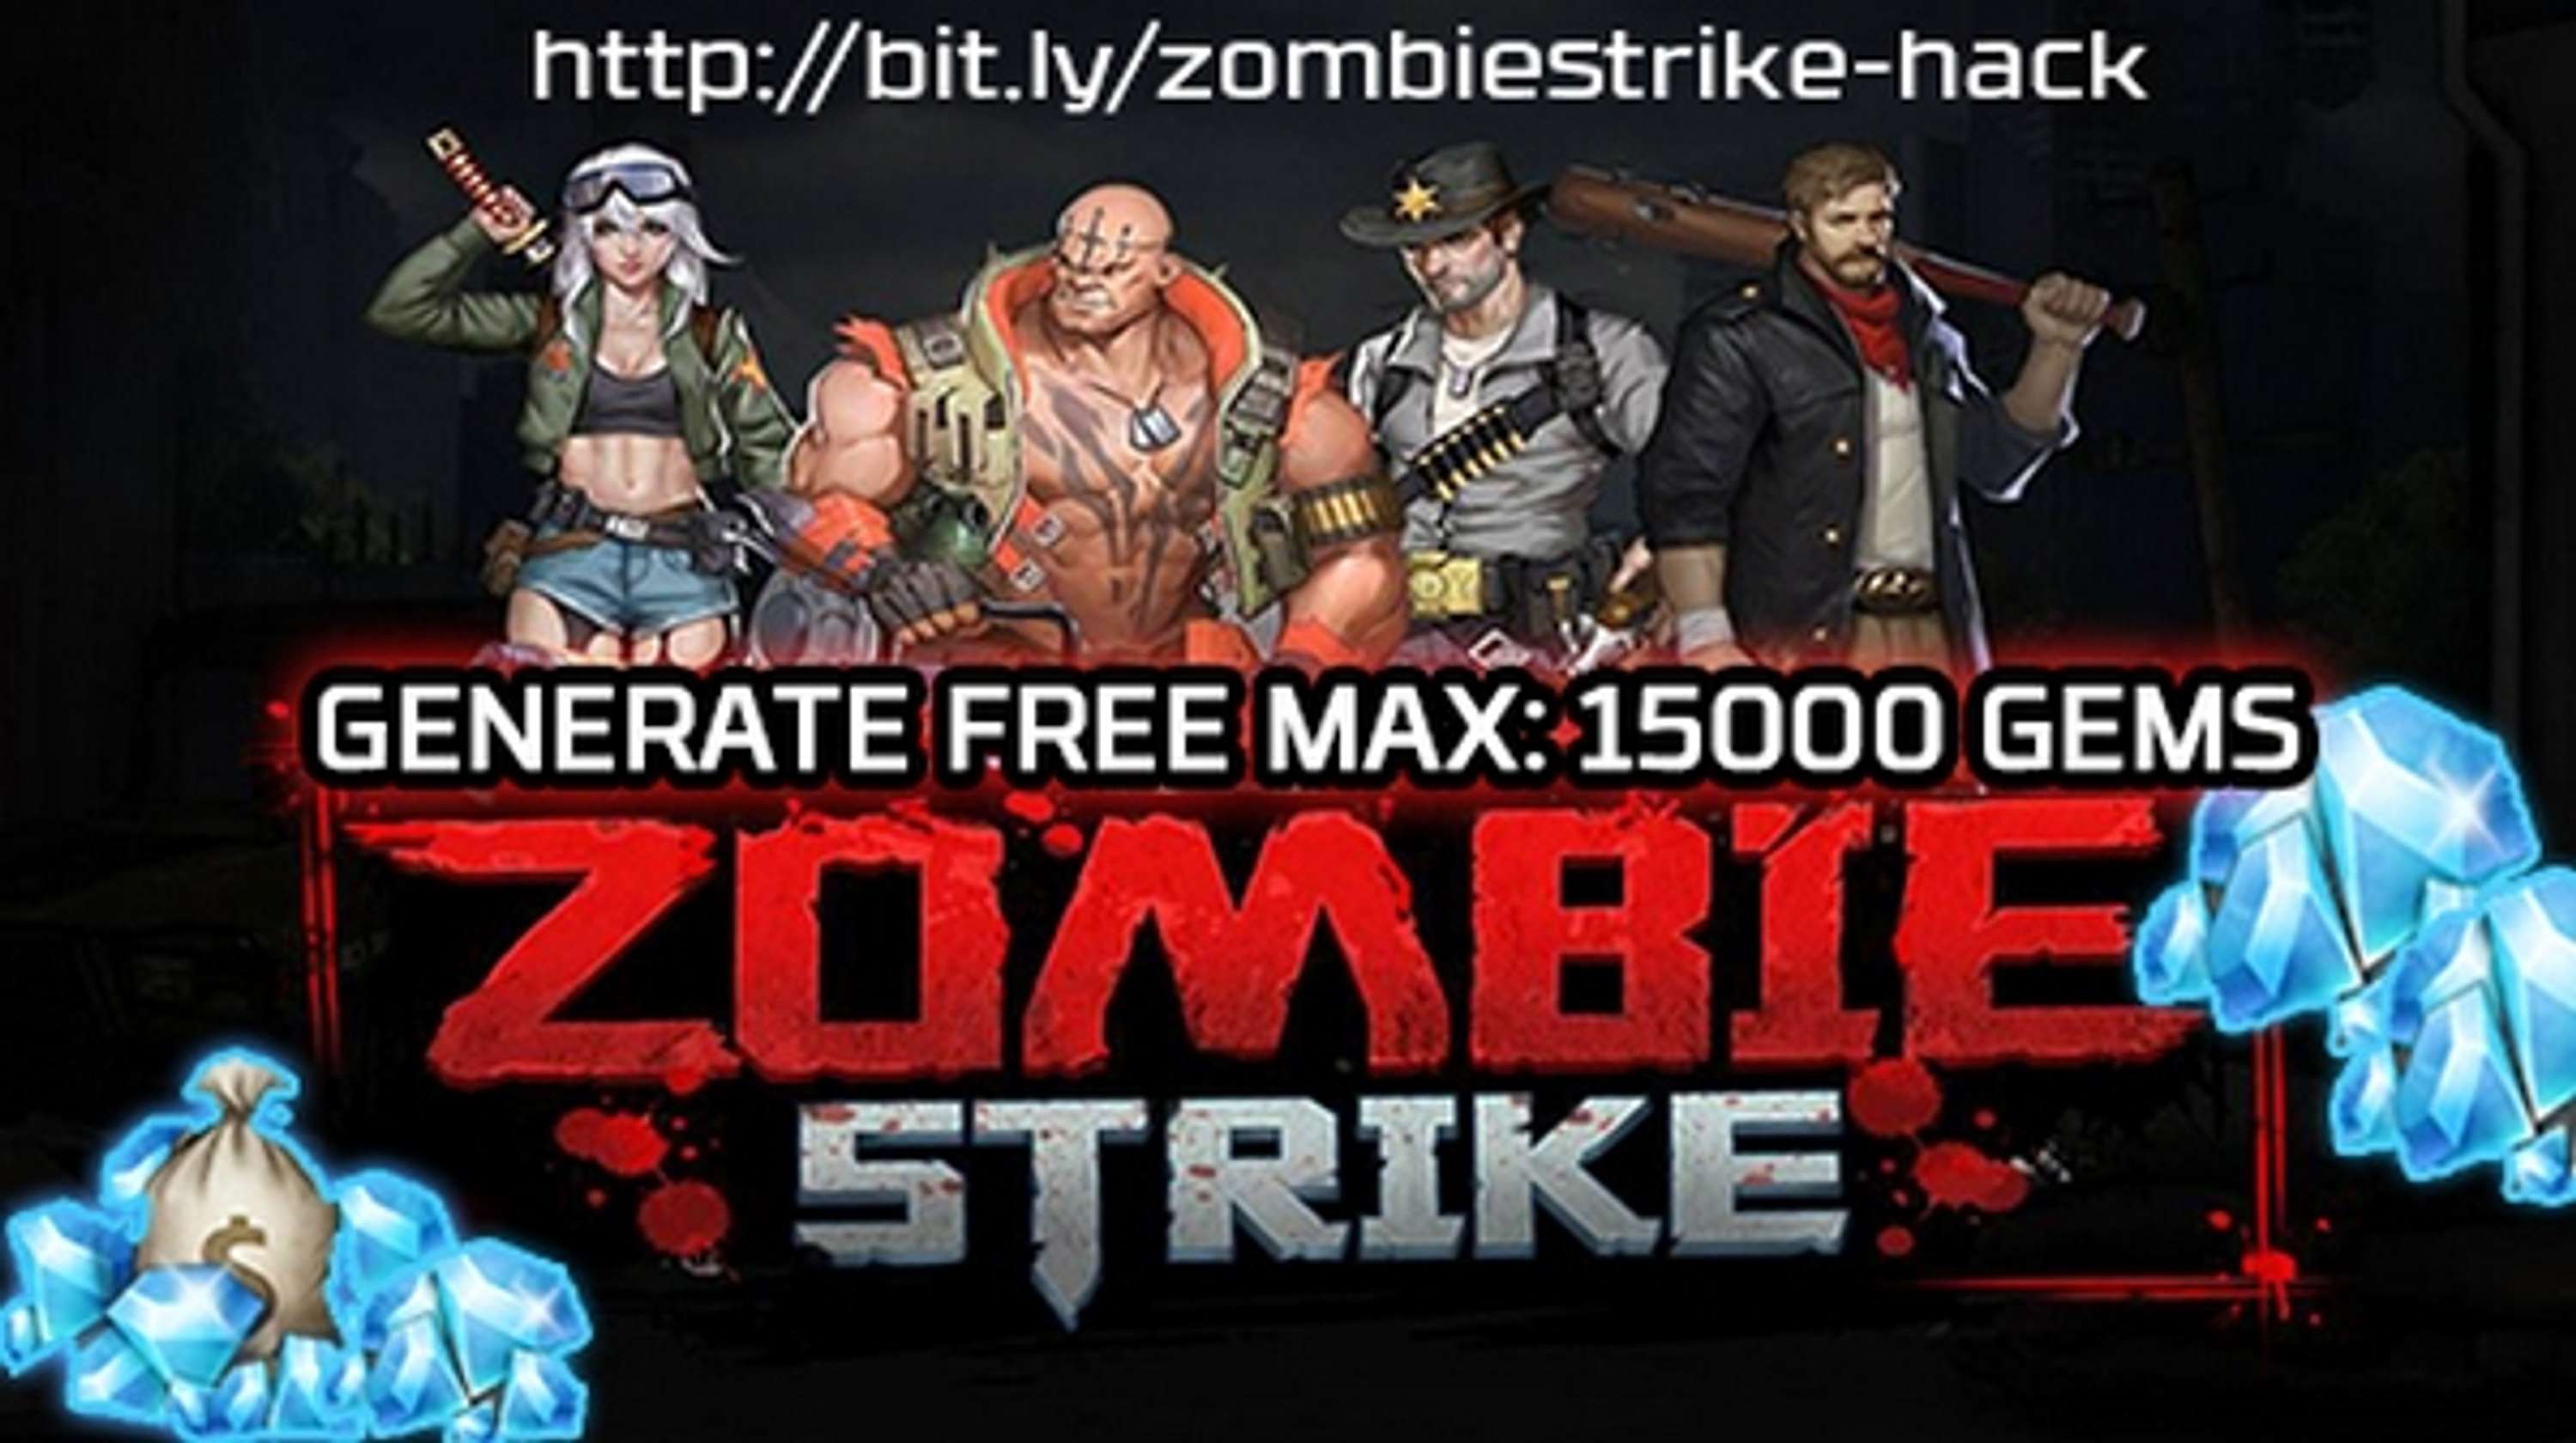 Zombie Strike Hack Cheat Gems Get 15000 Gems For Free The Dots